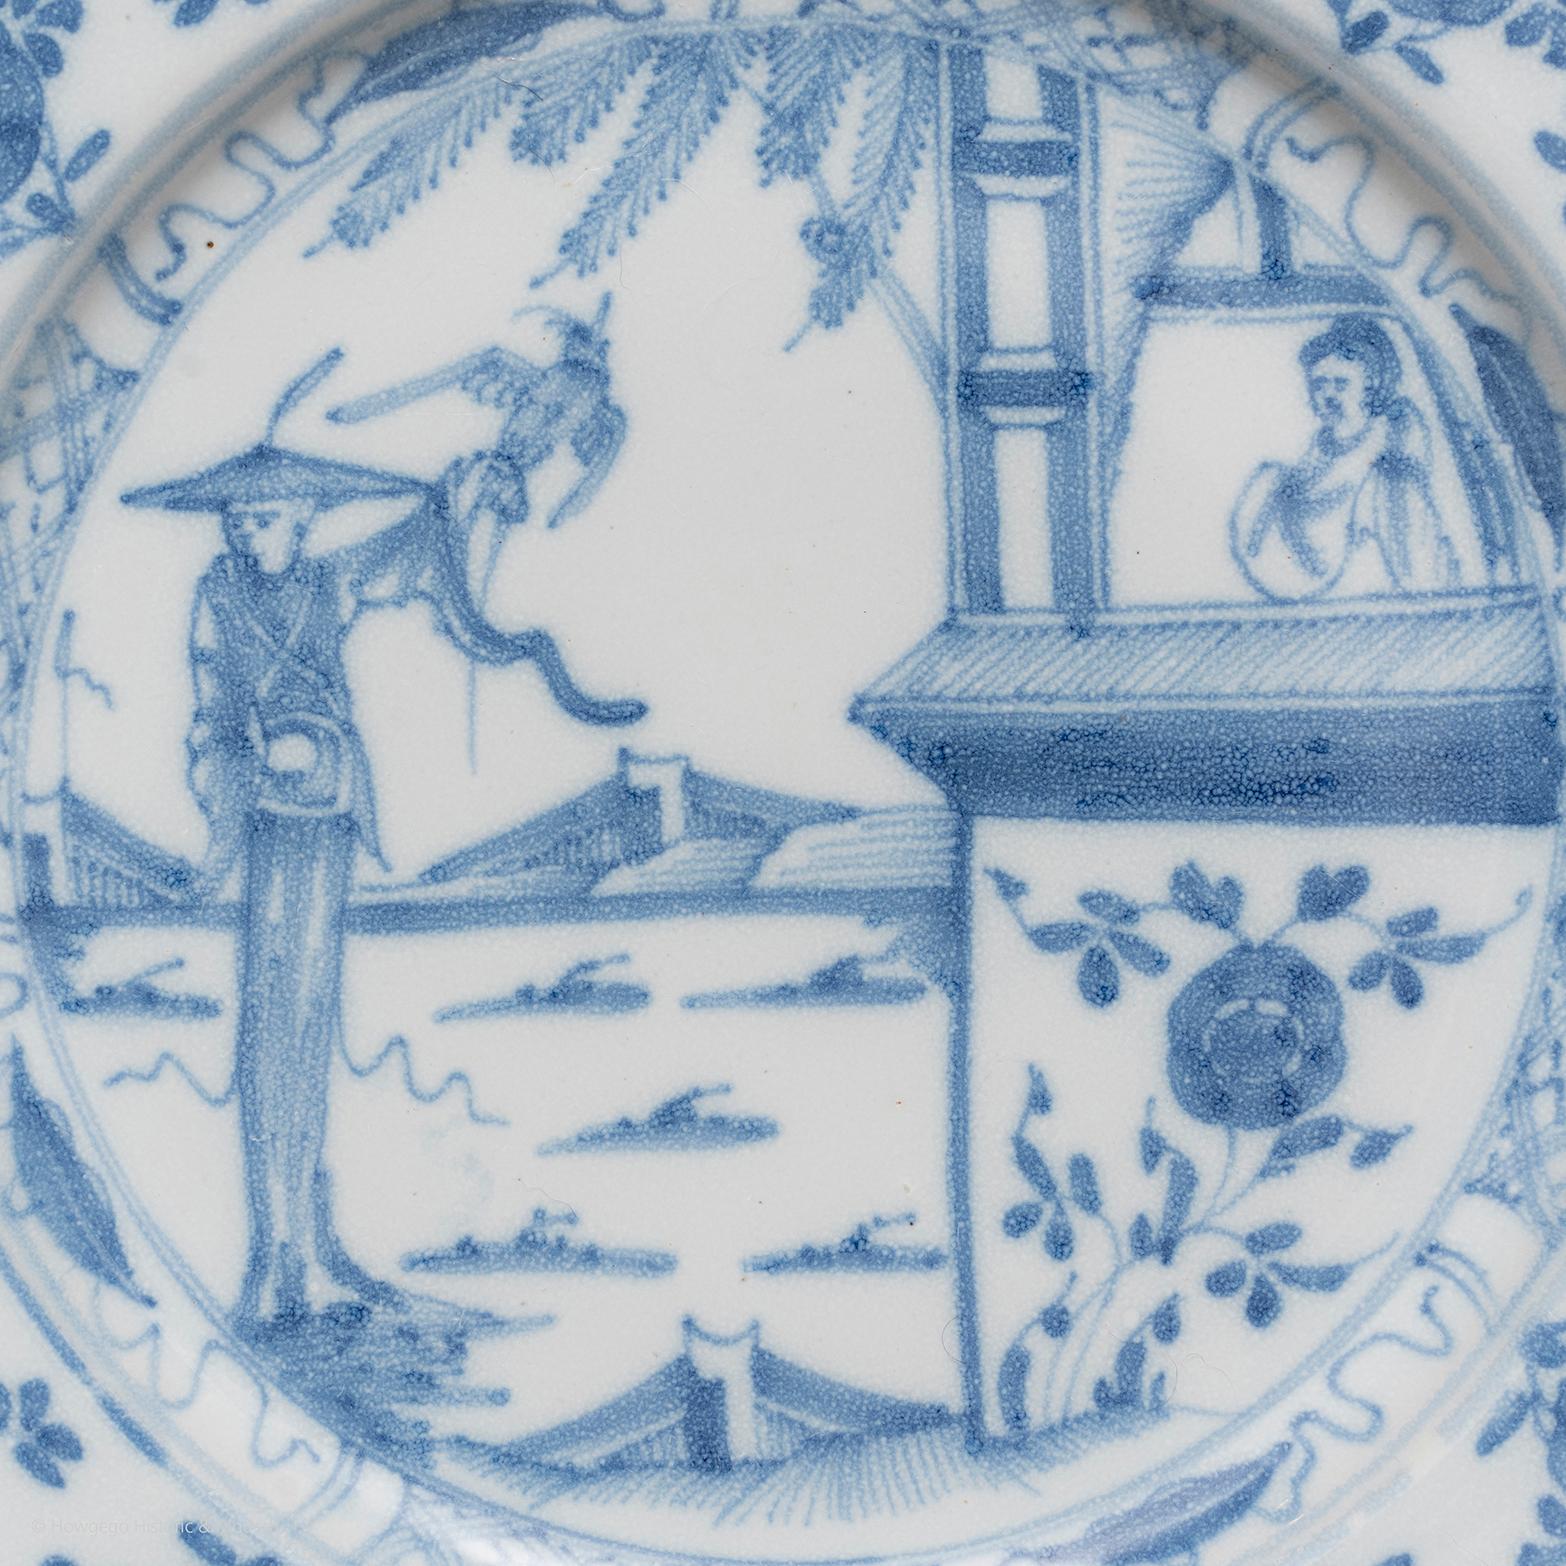 Hand-Painted Plates pair delftware English Liverpool blue white chinoiserie tall lady For Sale